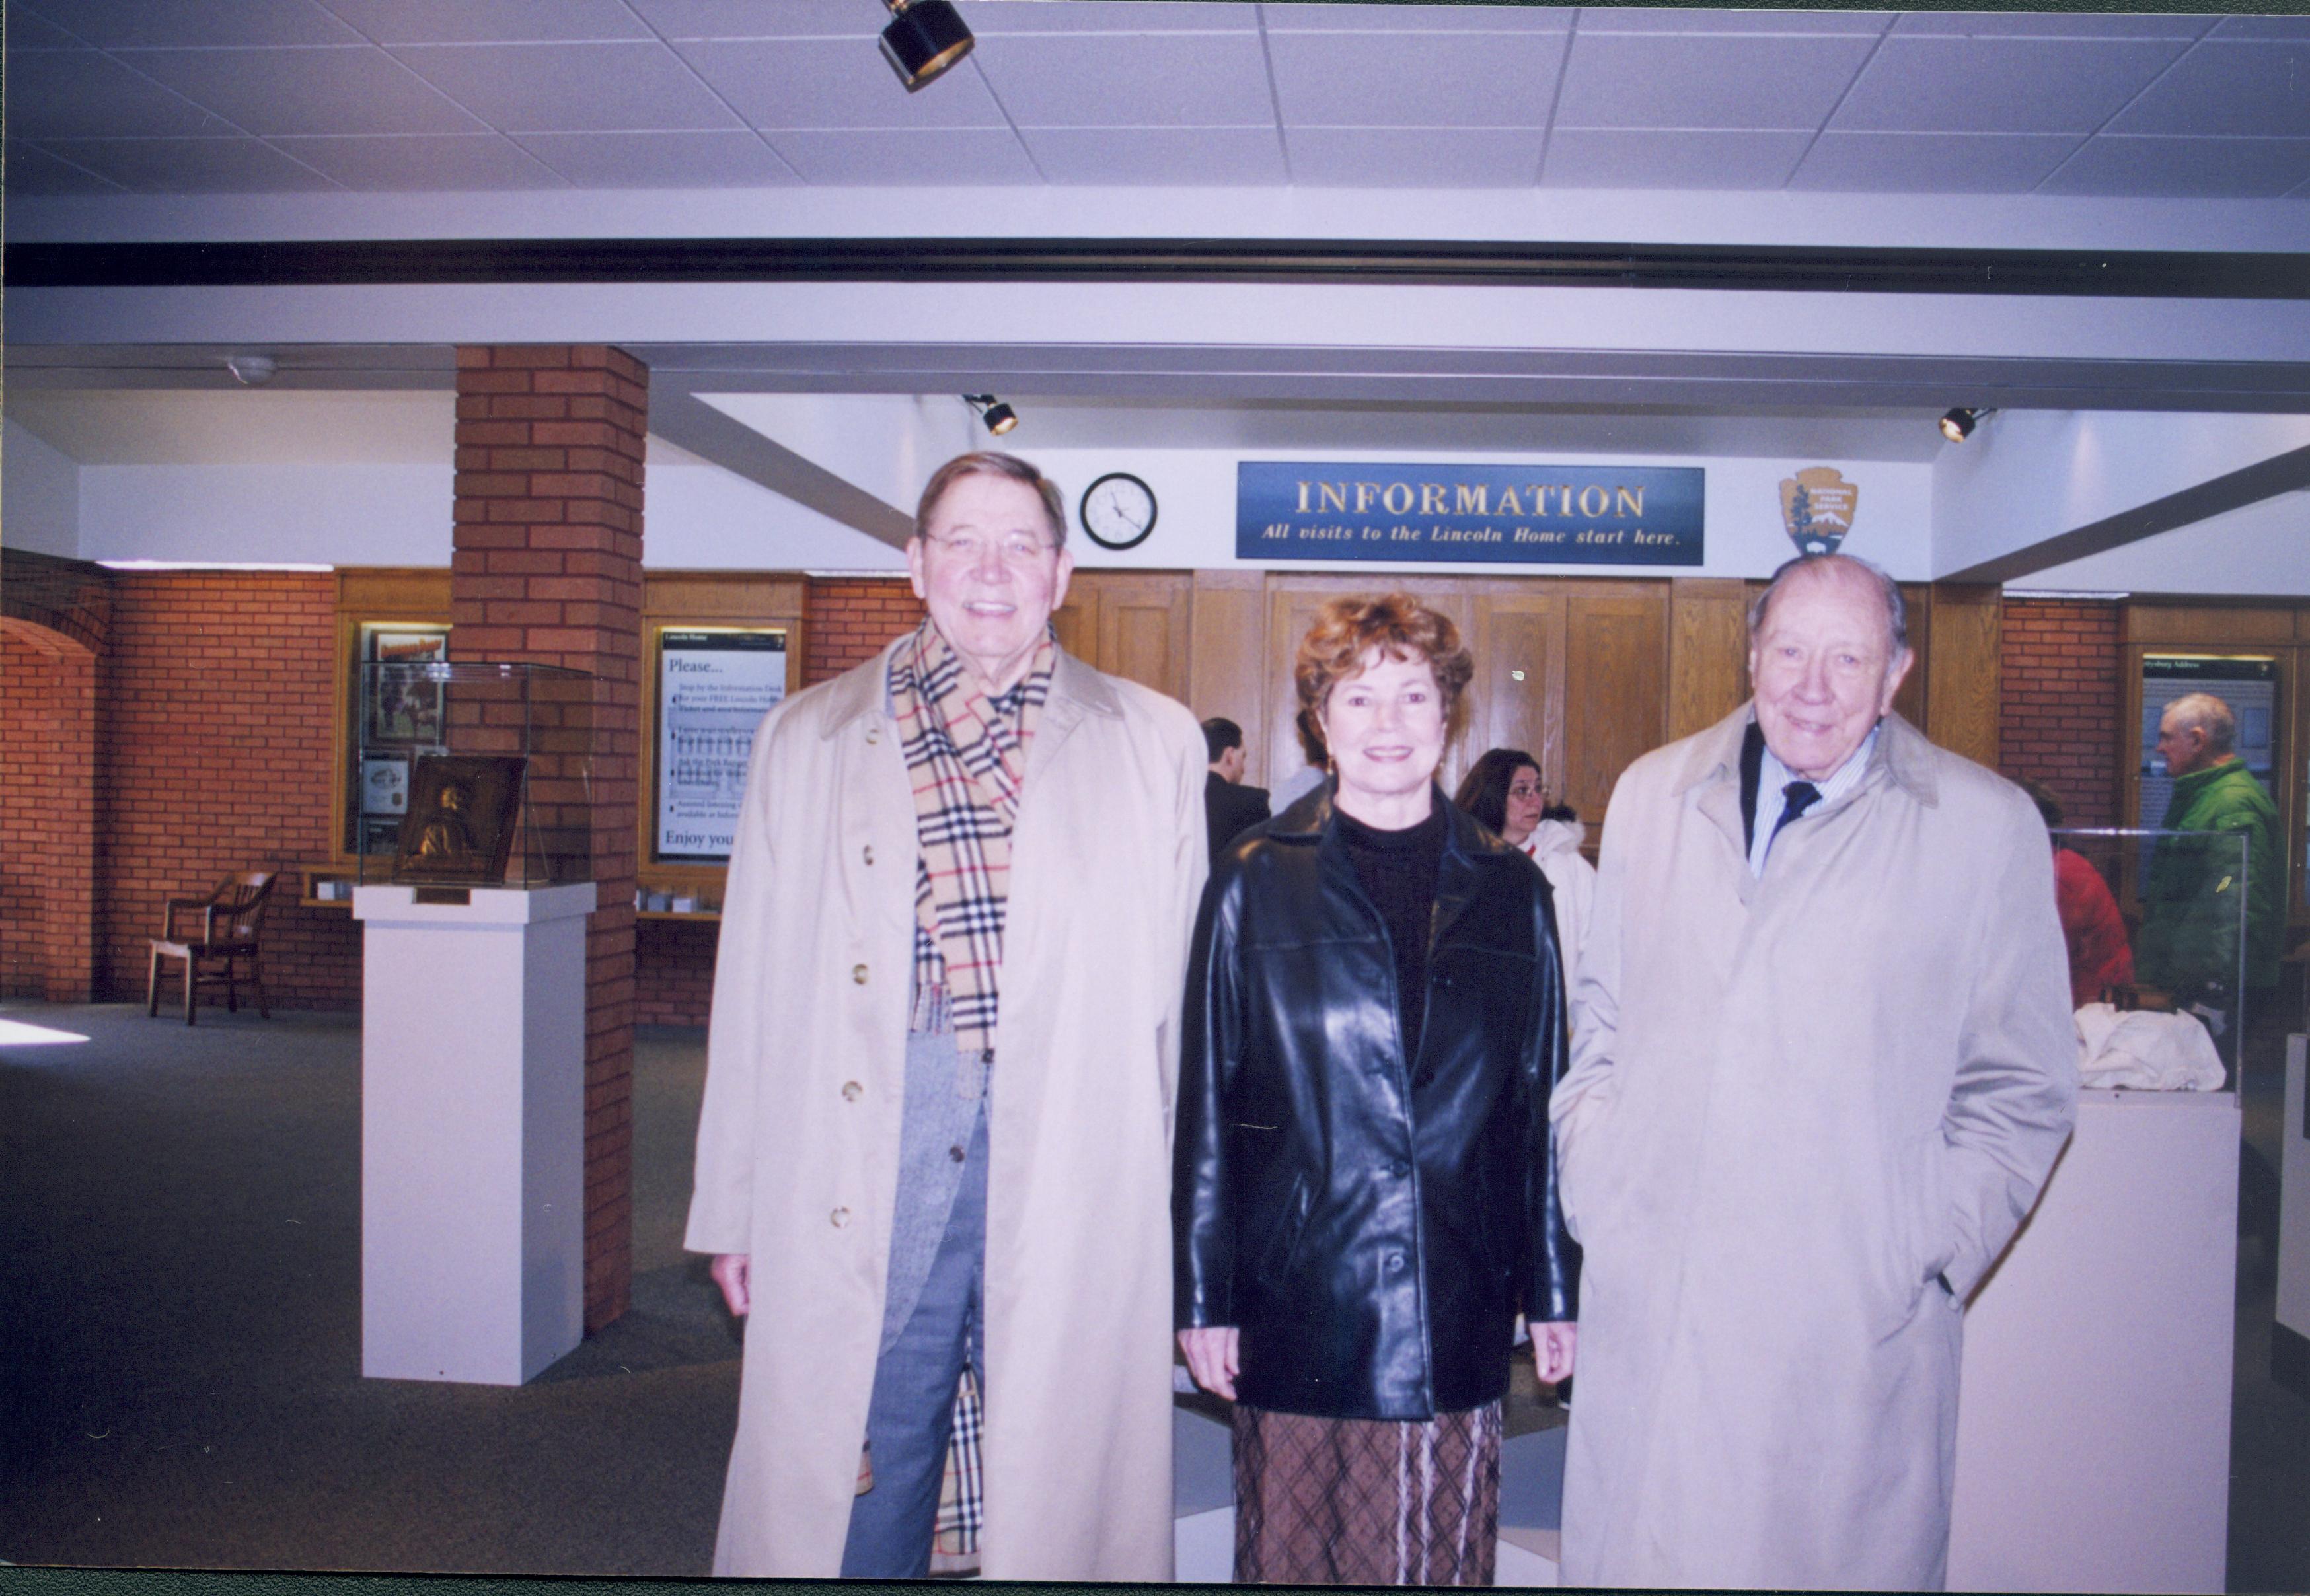 Lilncoln's Birthday - Special guest Admiral William J. Crowe, USN ret. (right), escorted by Admiral and Mrs. Ron Thunman visit during the birthday events in Visitor Center. Visitors visible in background near information desk Looking West from main area Lincoln's Birthday, visitors, VIP visit, Visitor Center